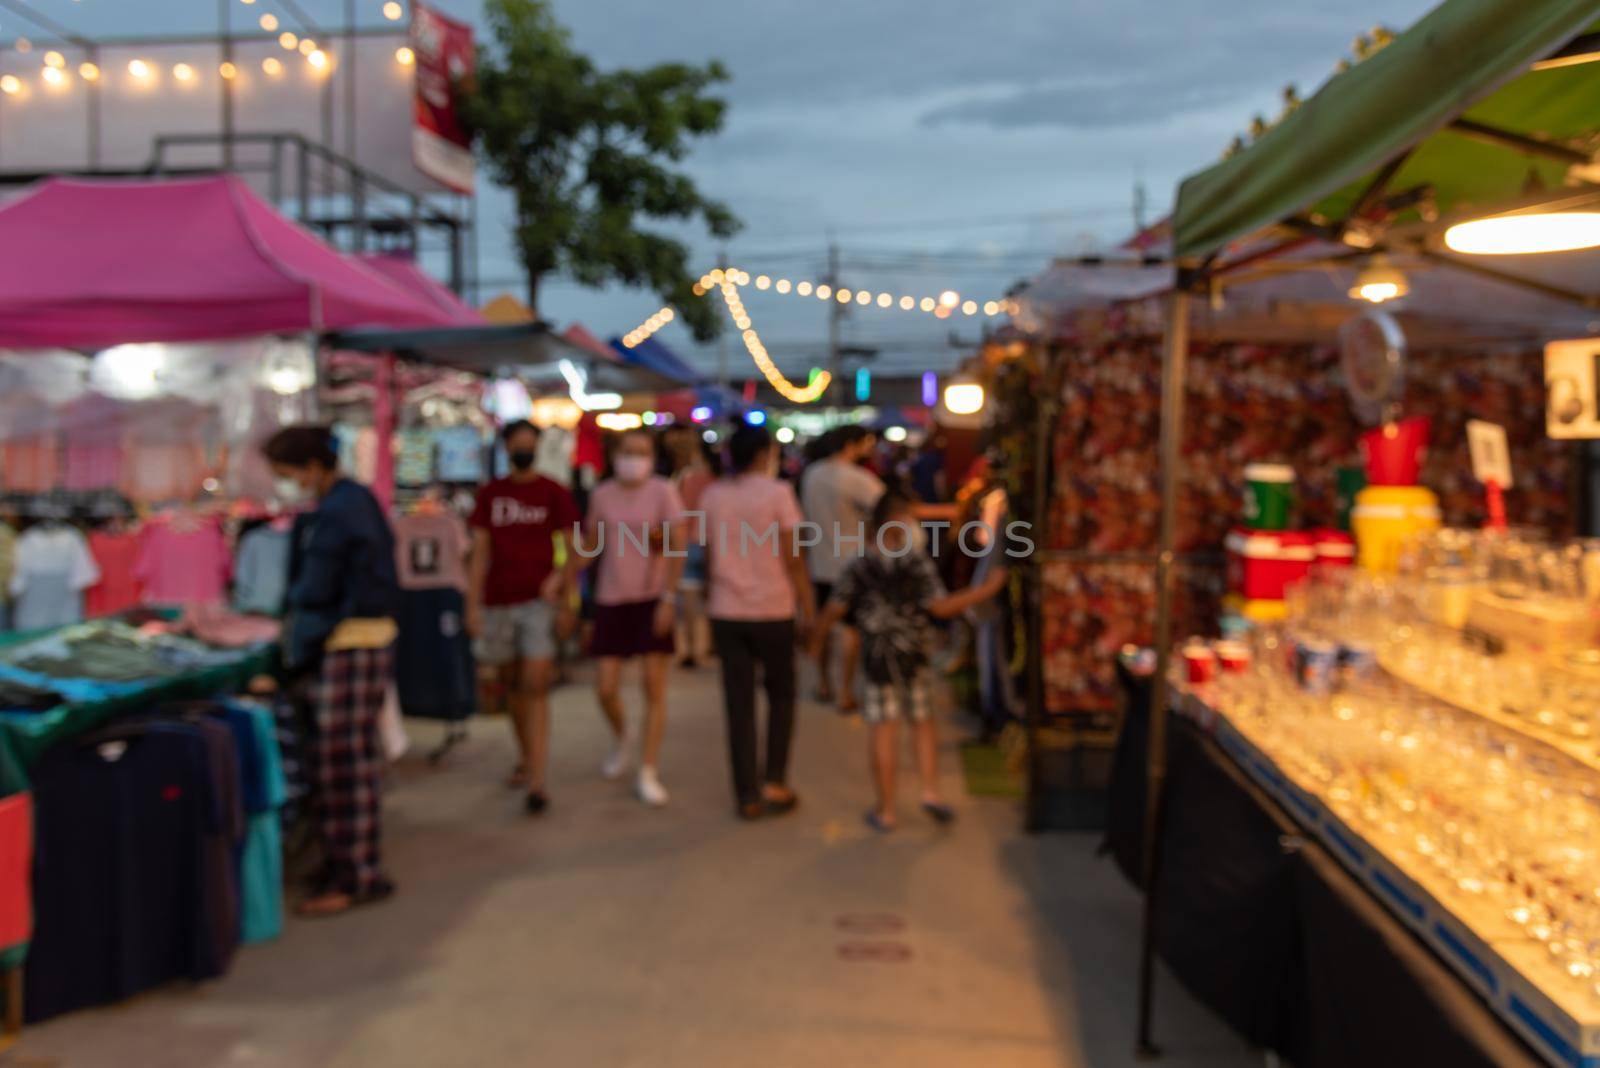 blurred image of night market festival people walking on road with light bokeh for background. by aoo3771